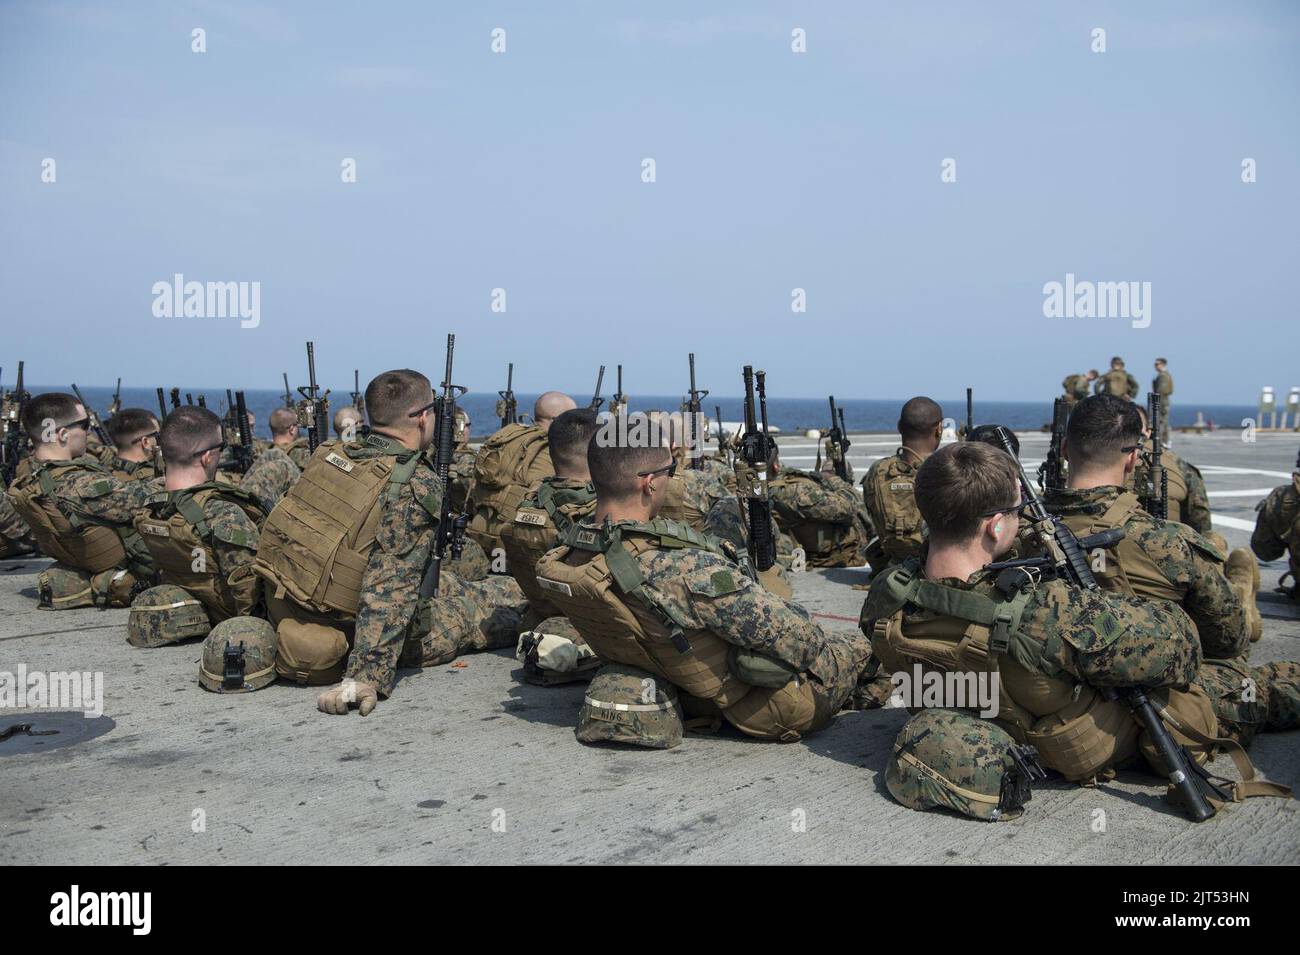 U.S. Marines assigned to Battalion Landing Team, 2nd Battalion, 5th Marine Regiment, 31st Marine Expeditionary Unit (MEU) prepare for a live-fire exercise aboard the amphibious transport dock ship USS Denver 140319 Stock Photo